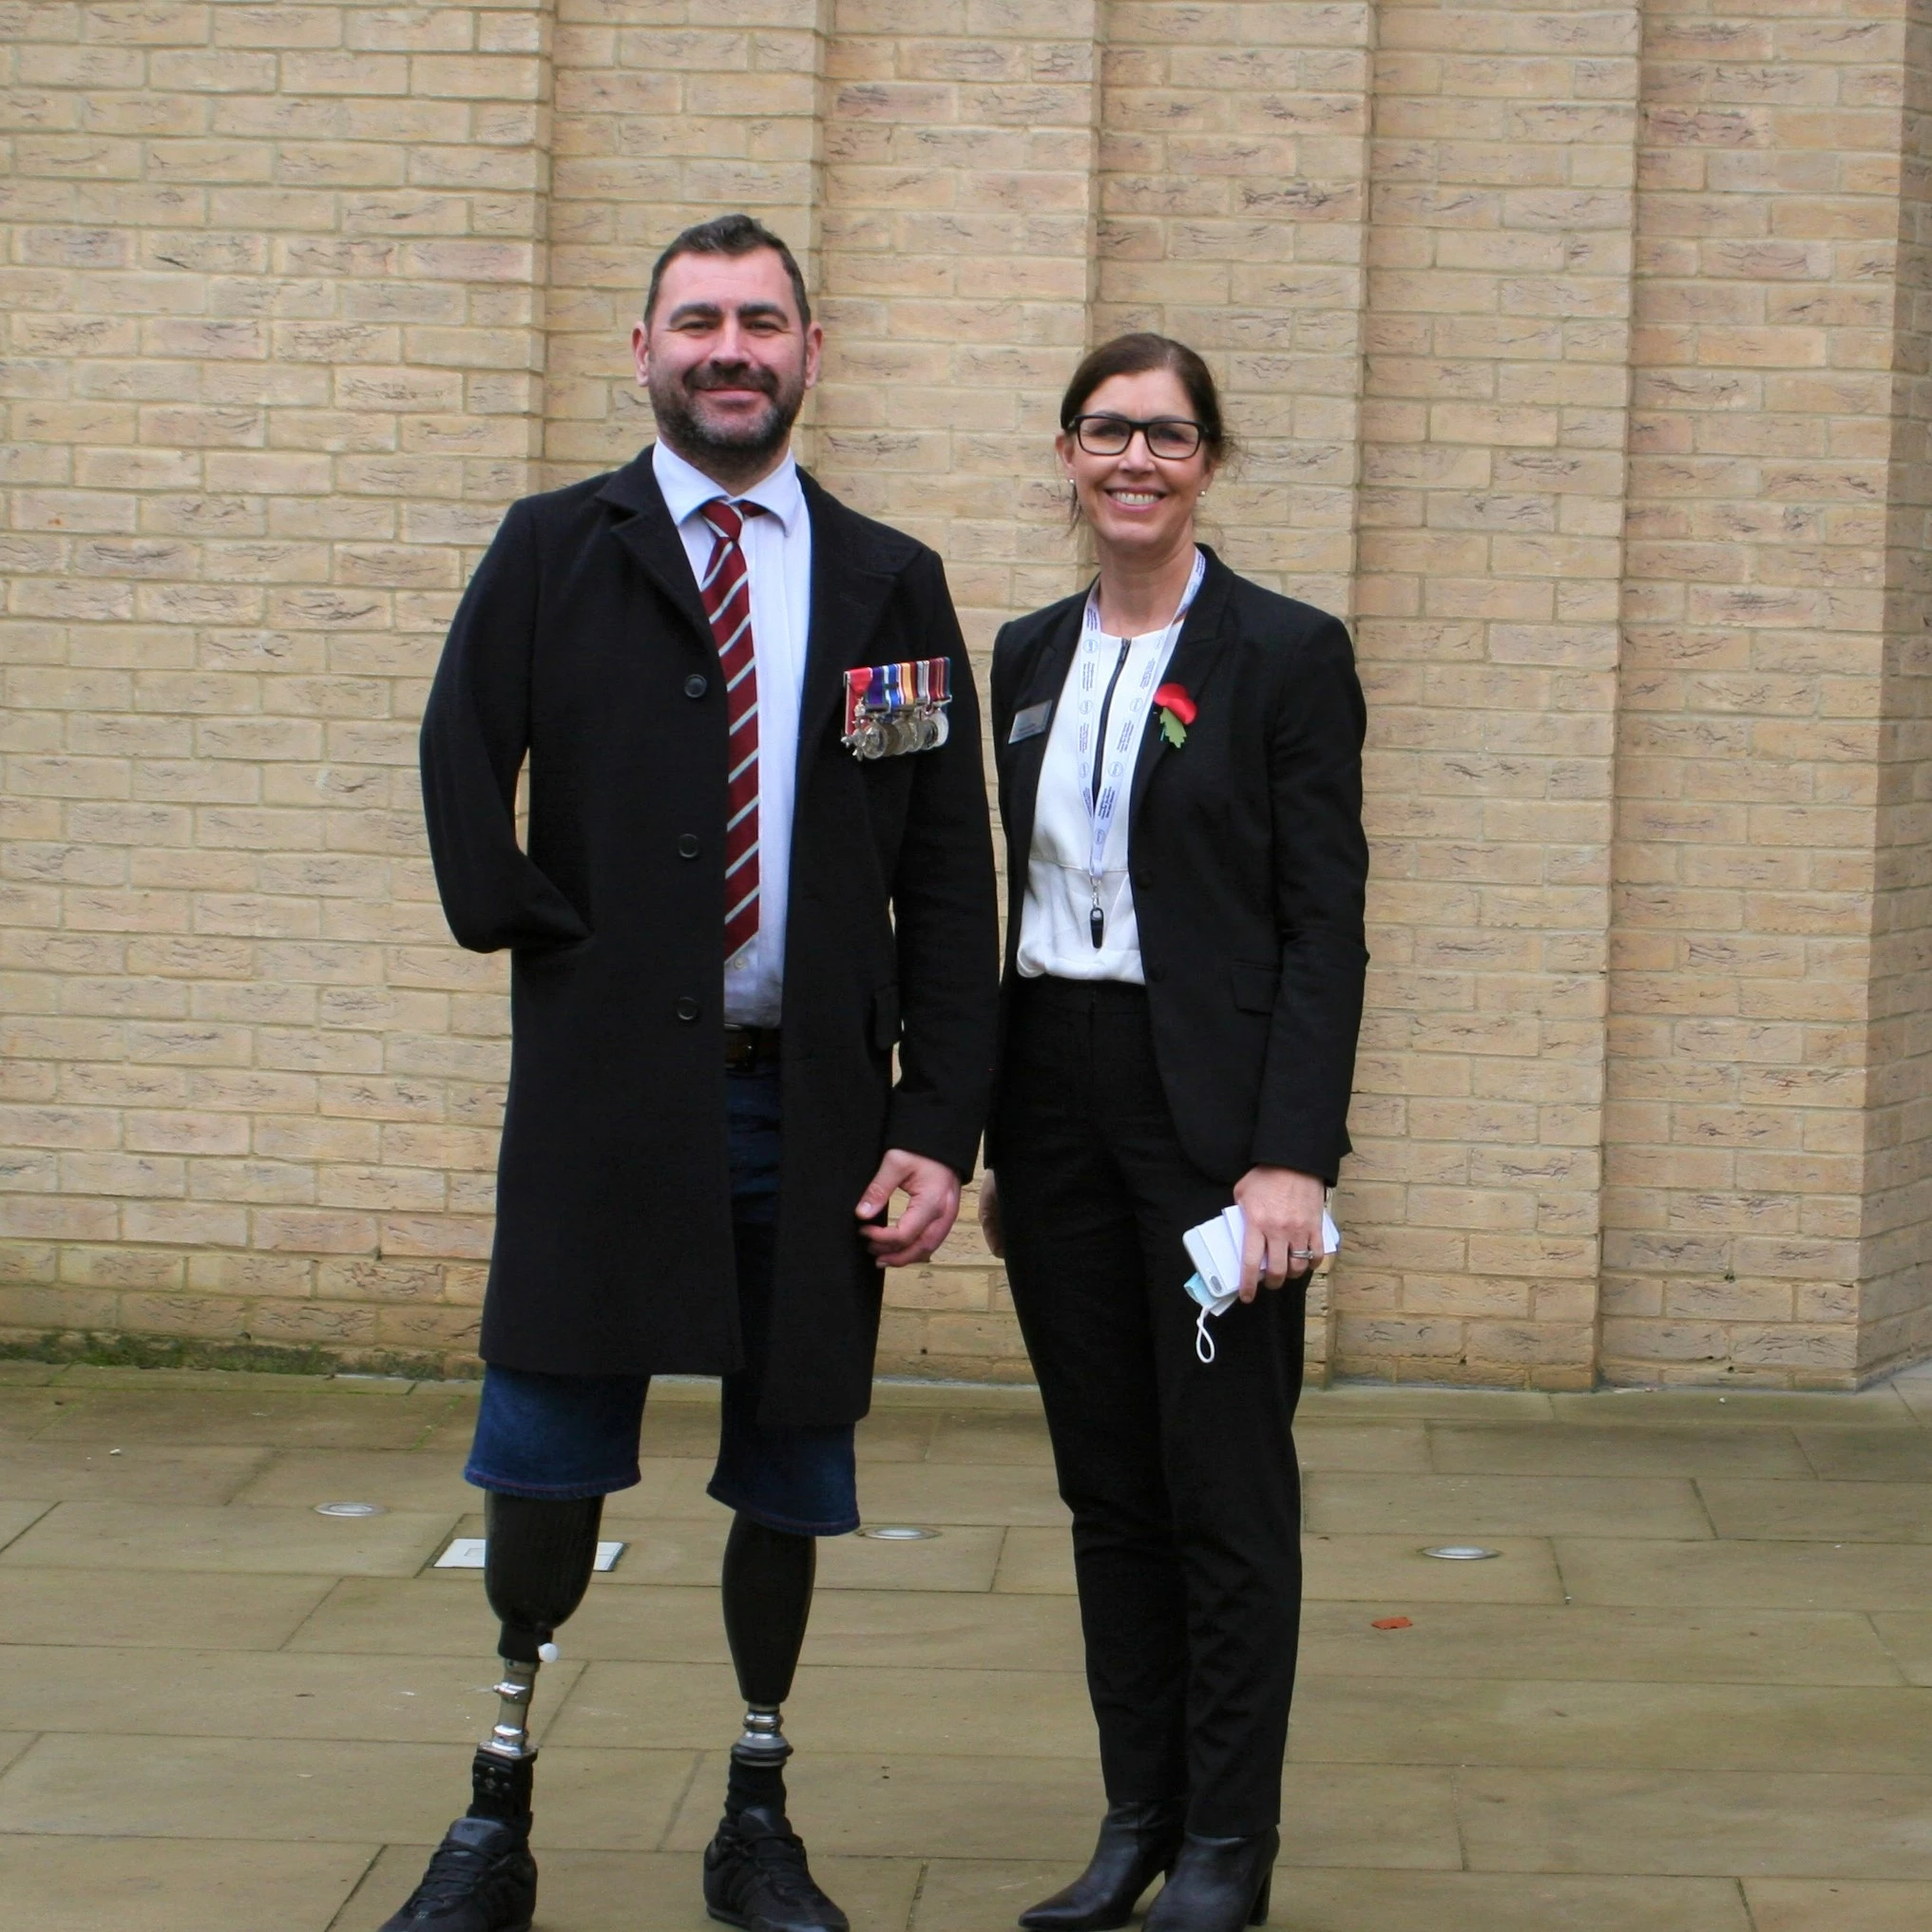 Andy Reid MBE with Broughton House chief executive Karen Miller